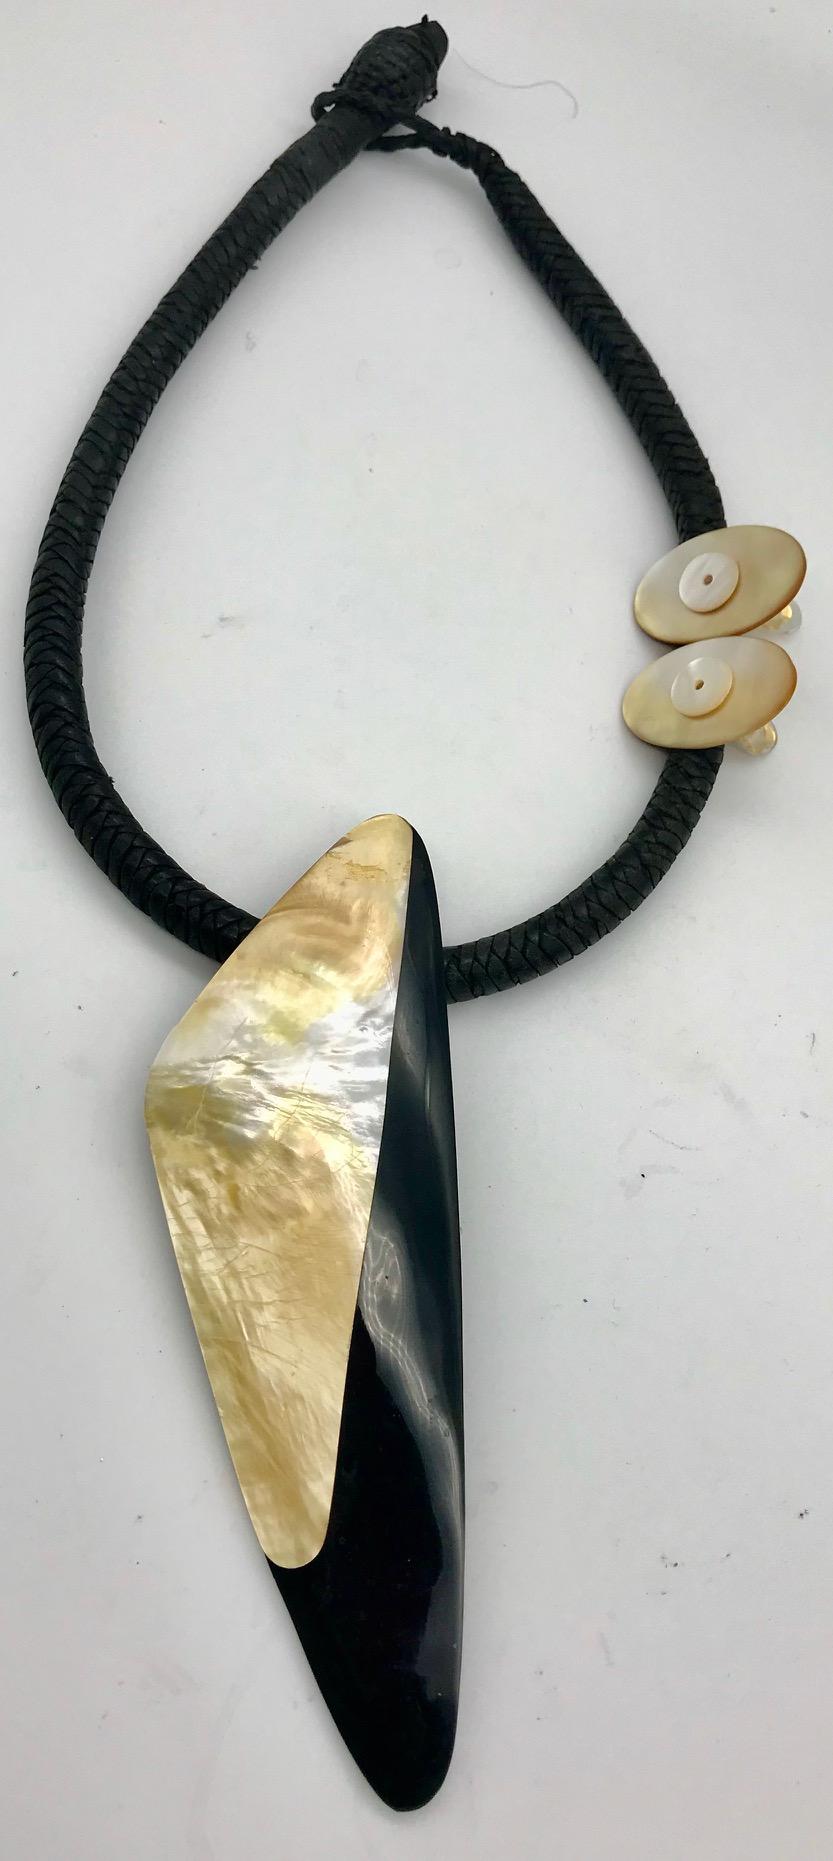 White /gold nacre with black Lucite Pendant on the woven leather necklace. This architectural style Pendant could be also worn on mainly  black side . It has French Deco up-cycled earrings to match.
The Pinctada Maxima  with white /golden nacre is